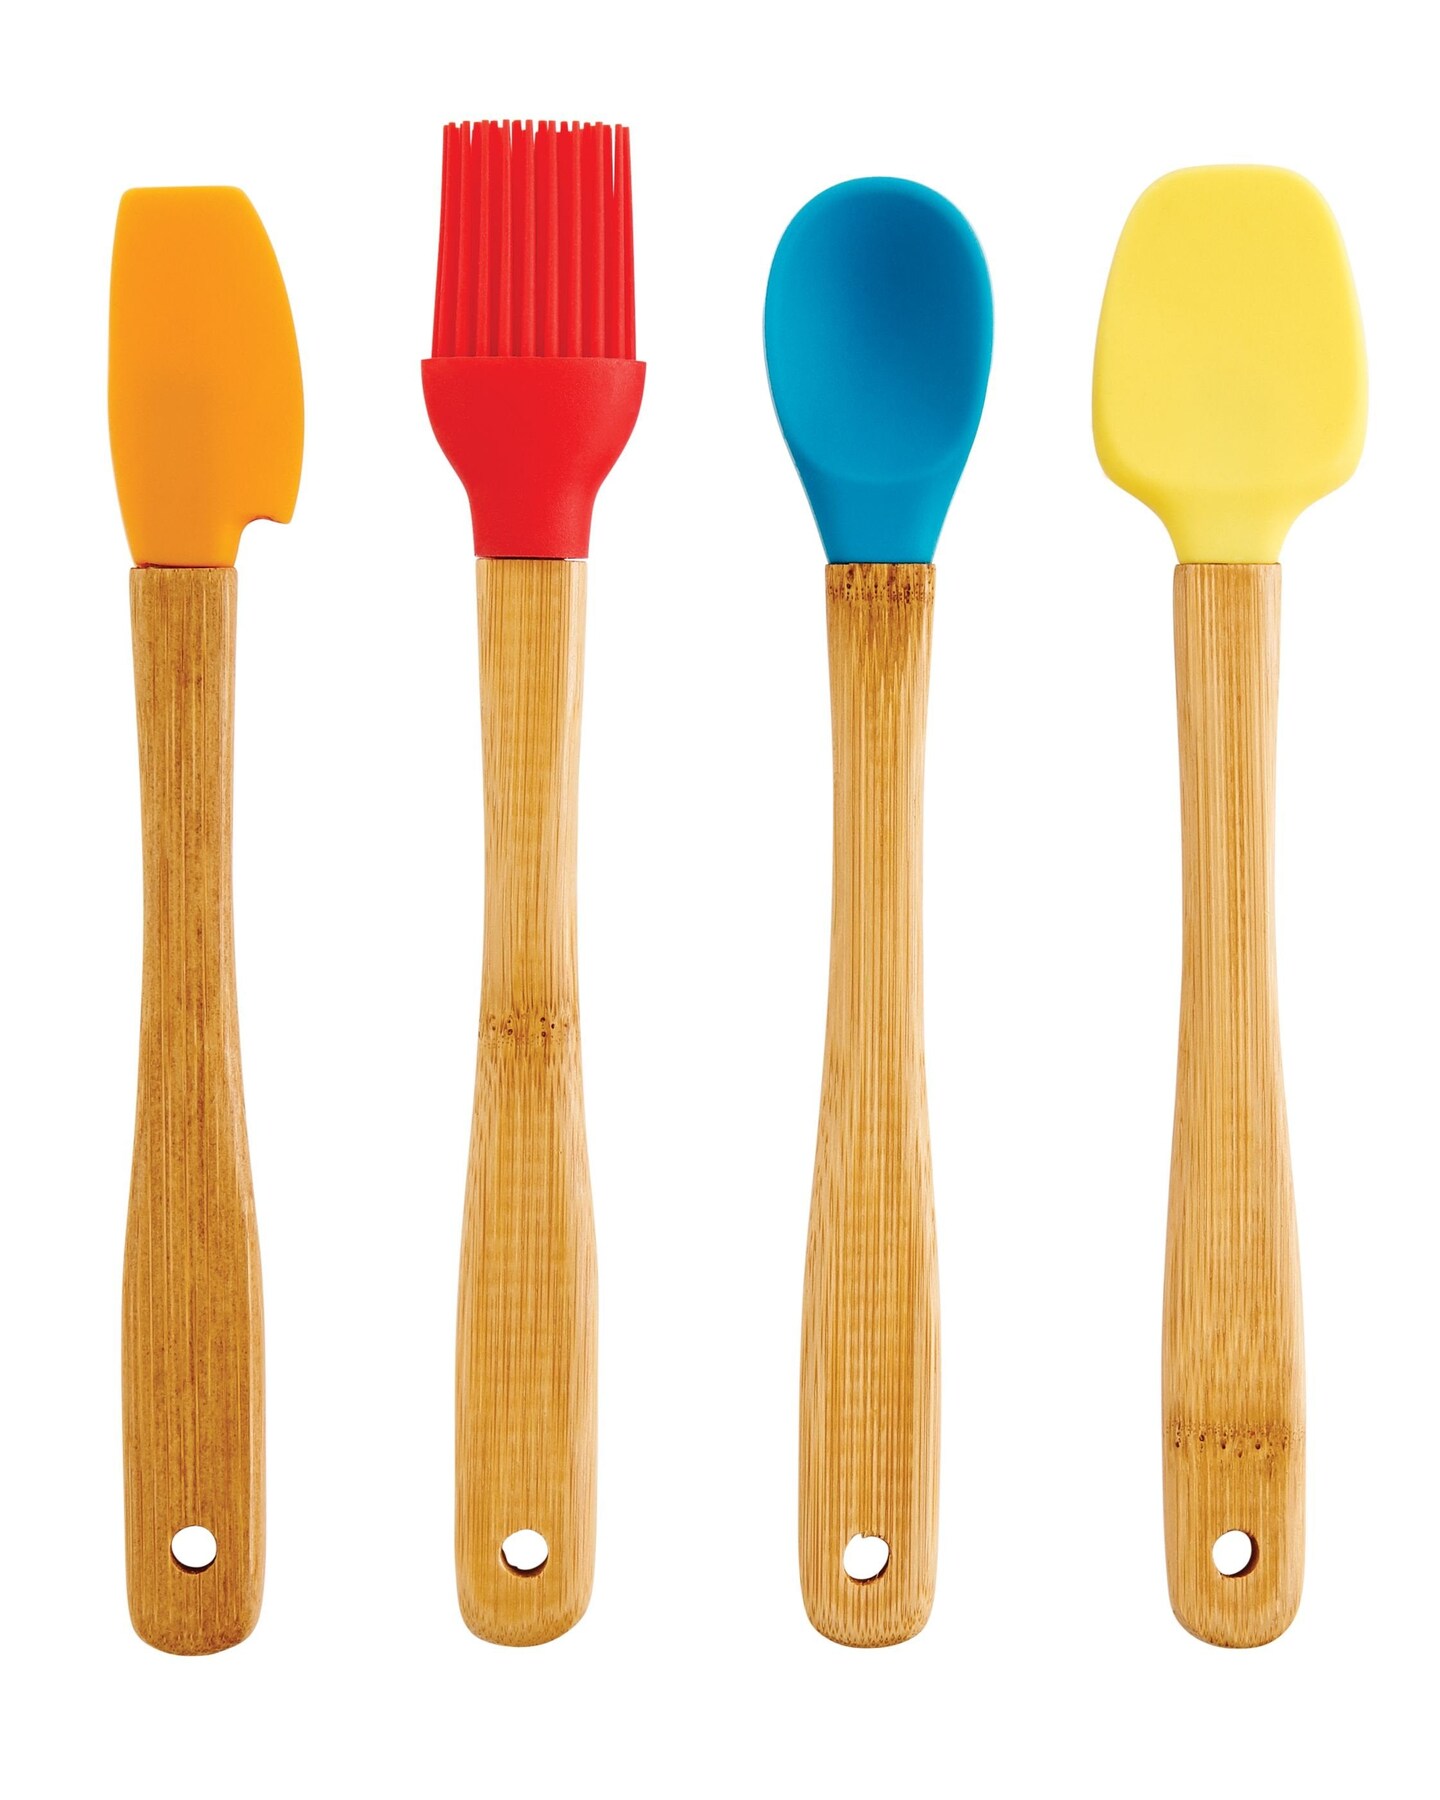 MegaChef Gray Silicone & Wood Cooking Utensils Set, 9ct.